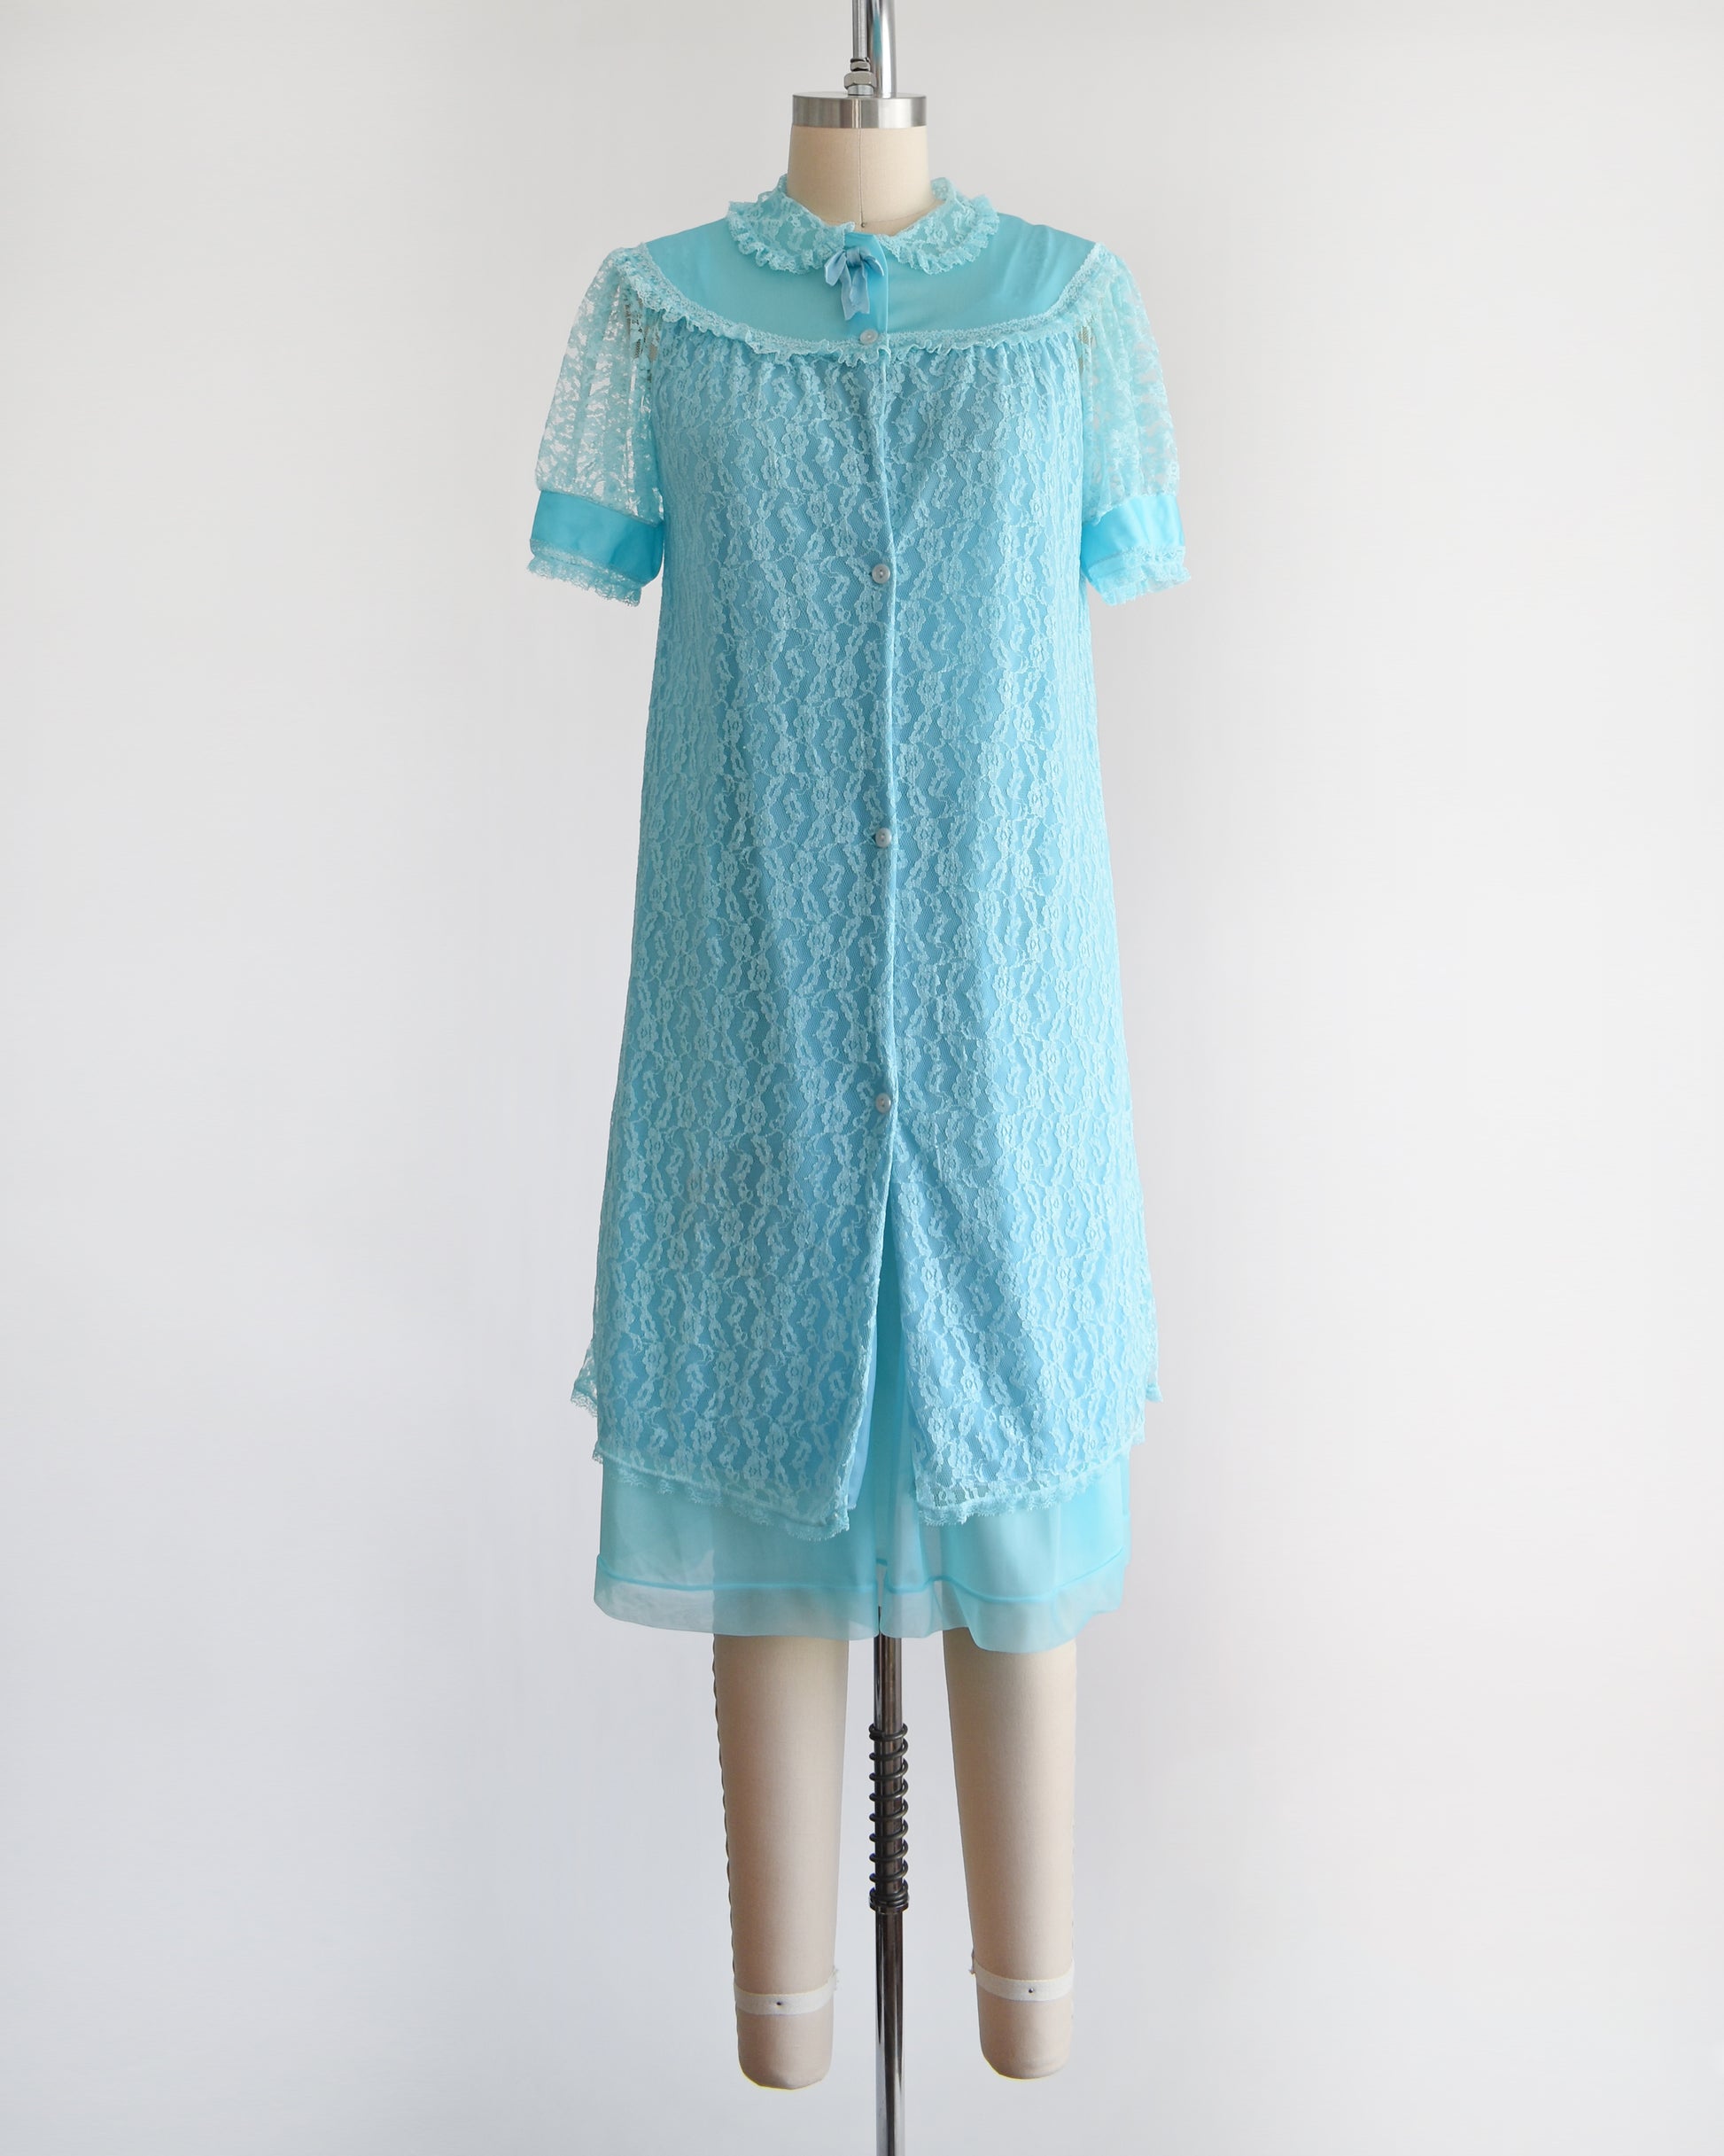 A vintage 1960s aqua blue peignoir set that comes with a lace robe and matching nightgown. The robe is buttoned in this photo.